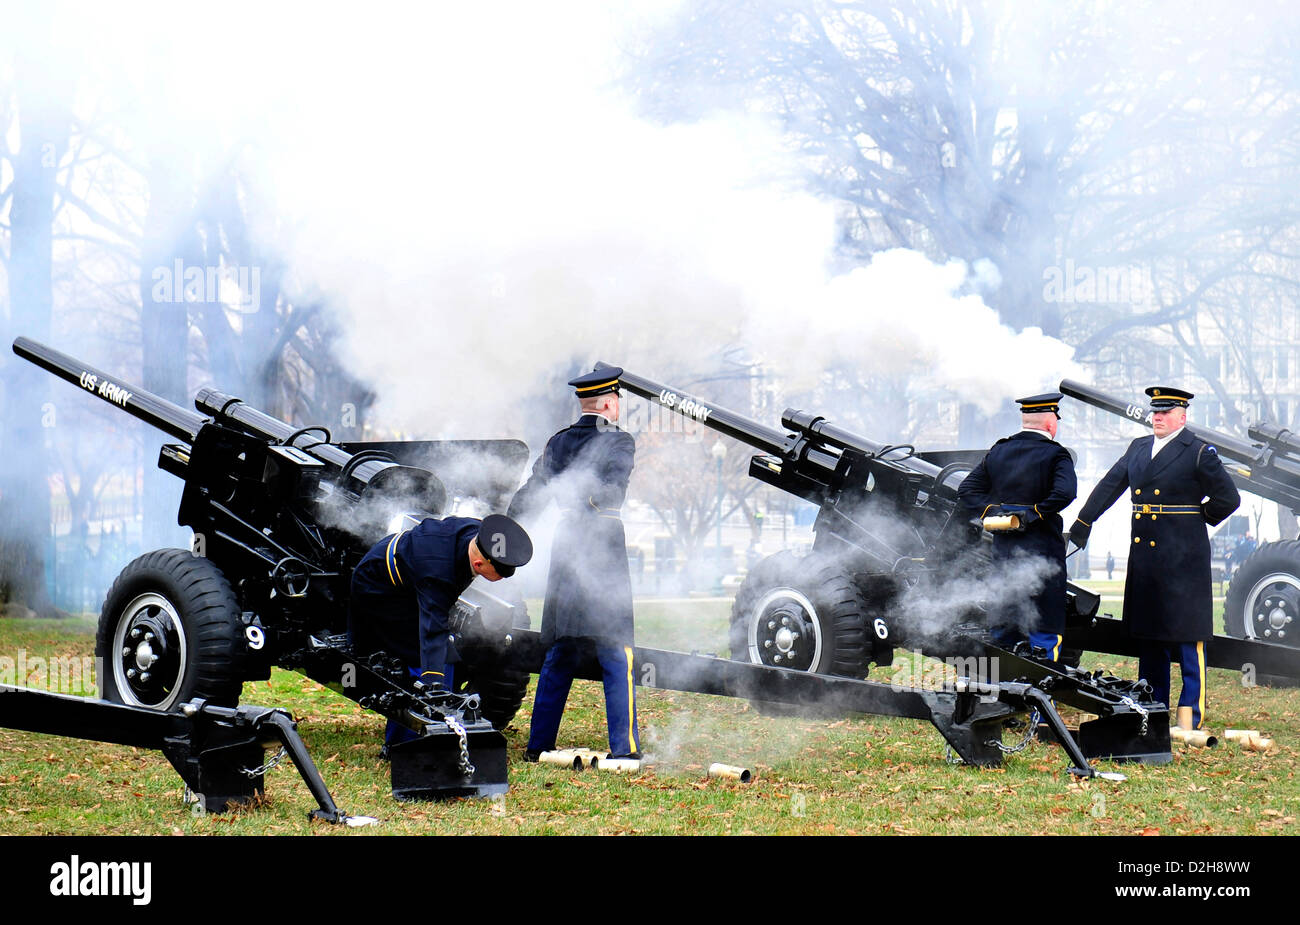 Members of the Old Guard fire cannons during honoring the 57th Presidential Inauguration January 21, 2013 in Washington, DC. Stock Photo